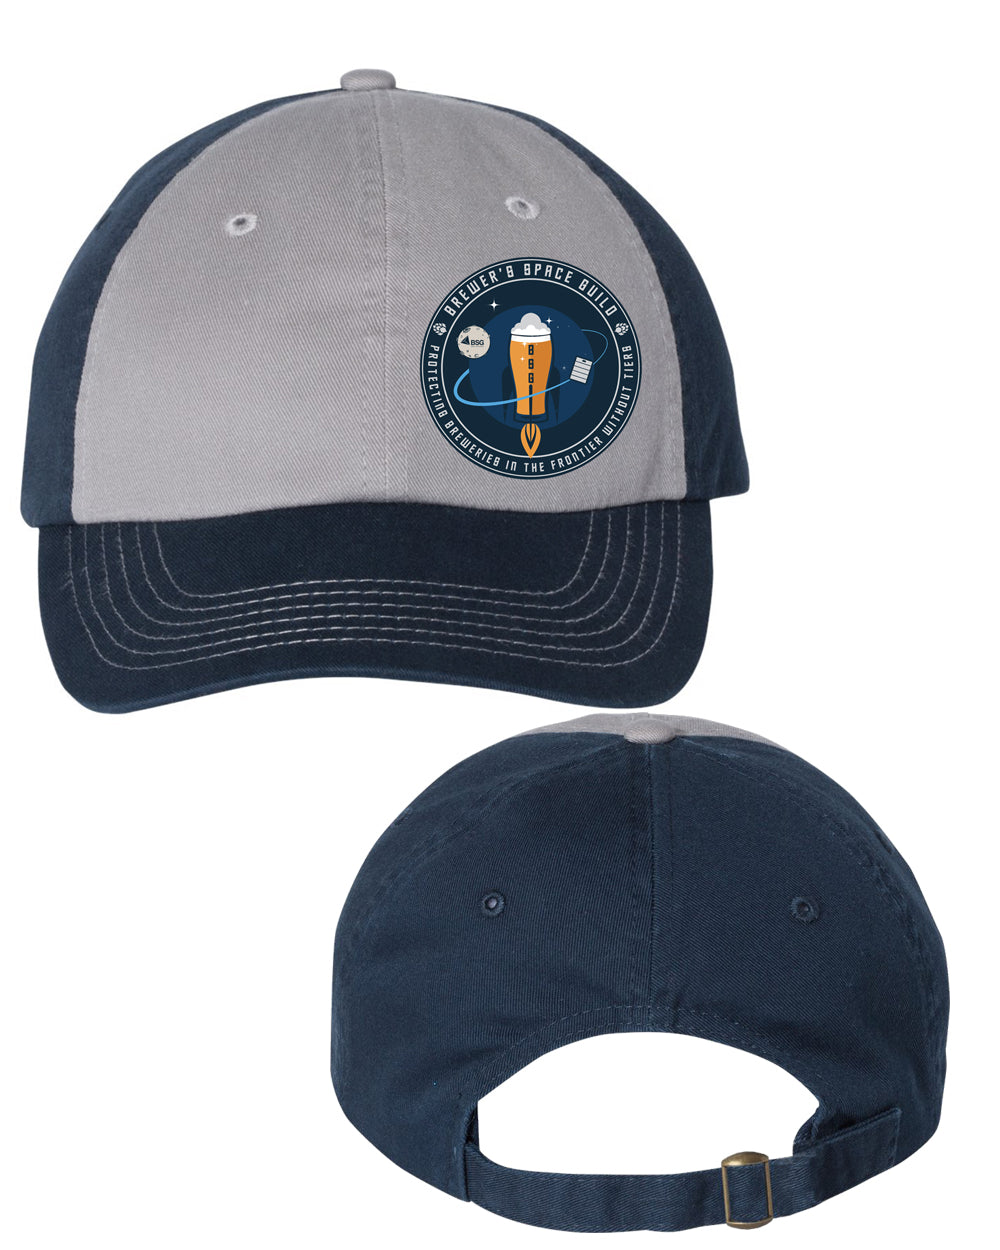 Brewers Space Guild Hat